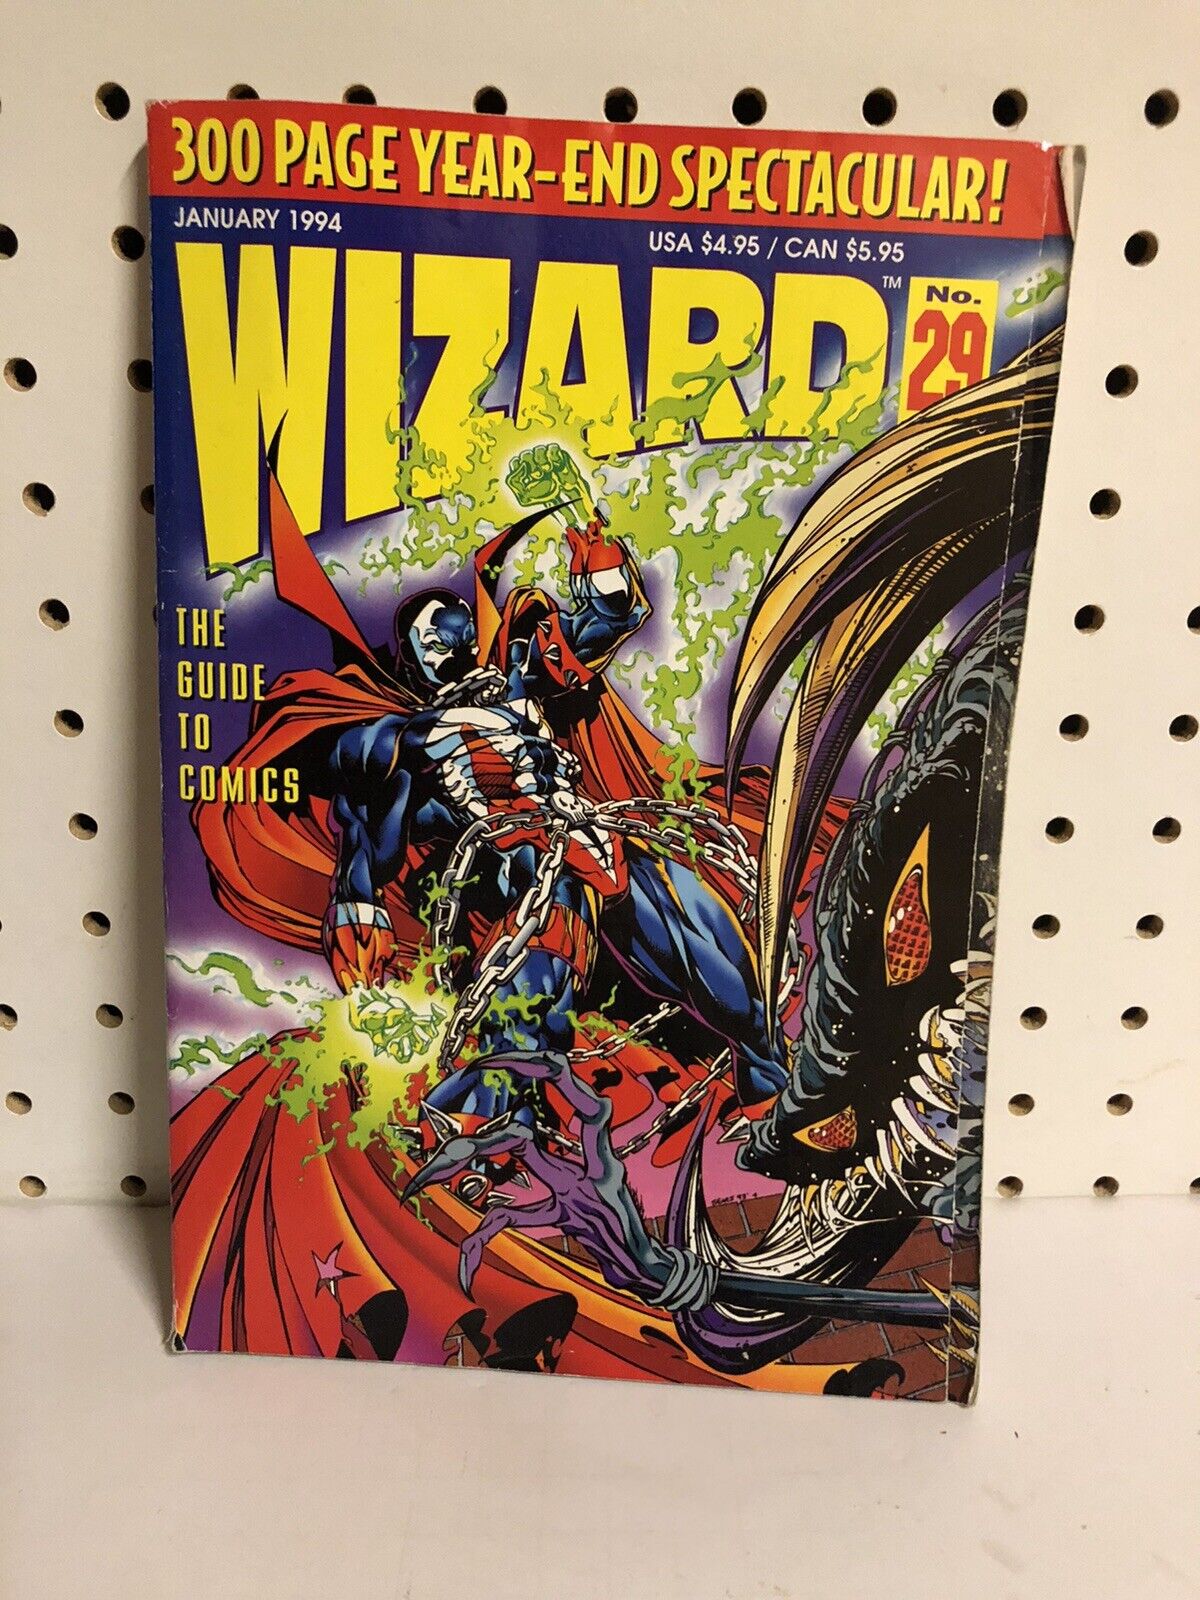 Wizard The Guide to Comics #29 Spawn Violator Todd McFarlane Poster Cover 1993